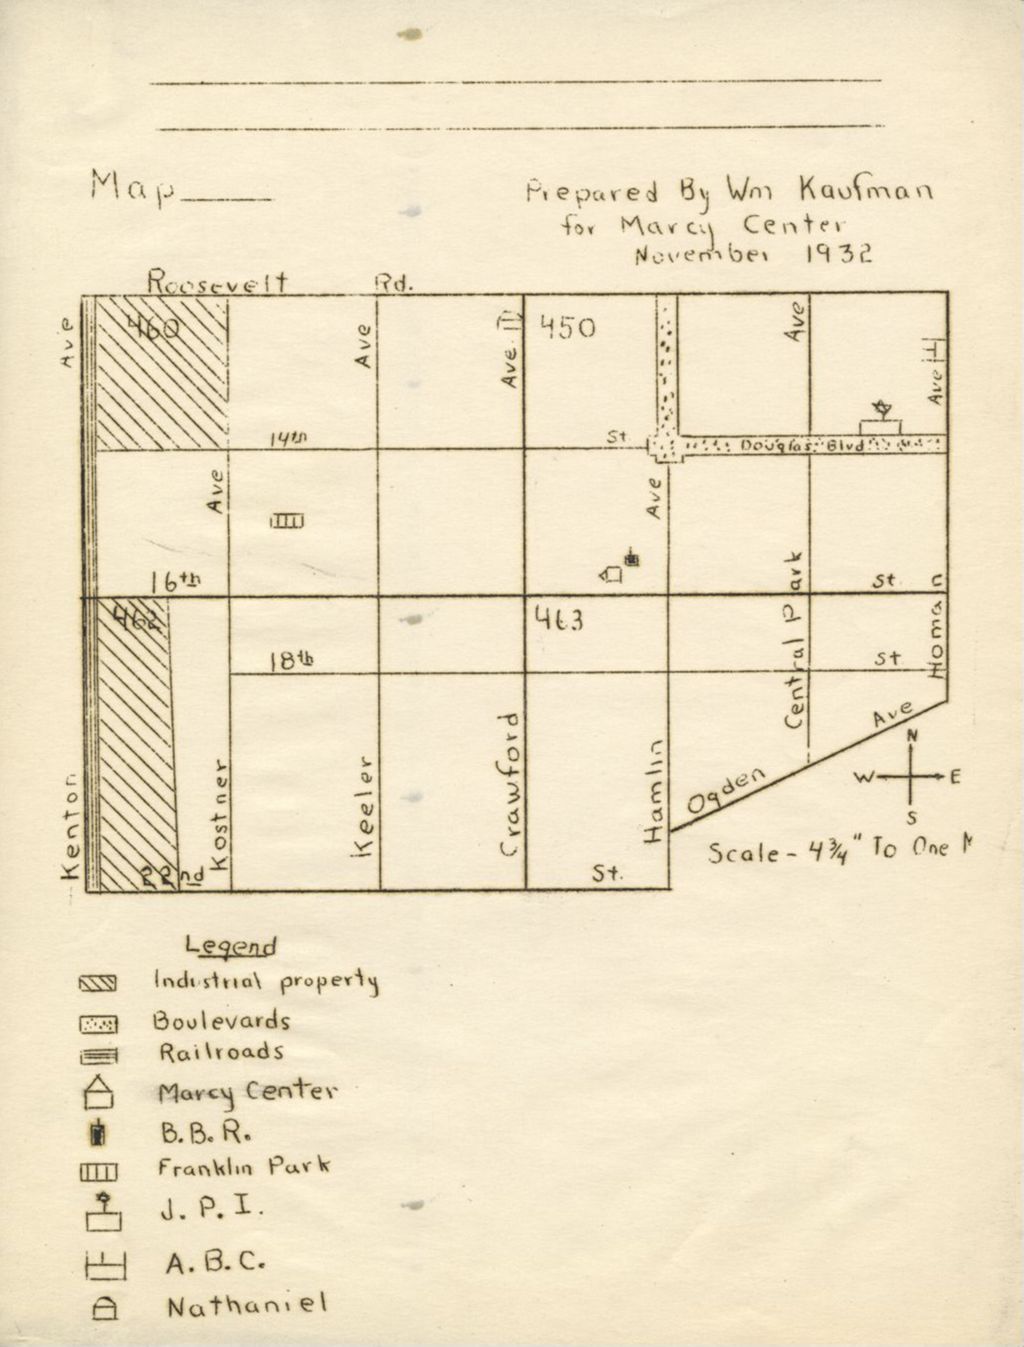 North Lawndale map showing location of Marcy Center